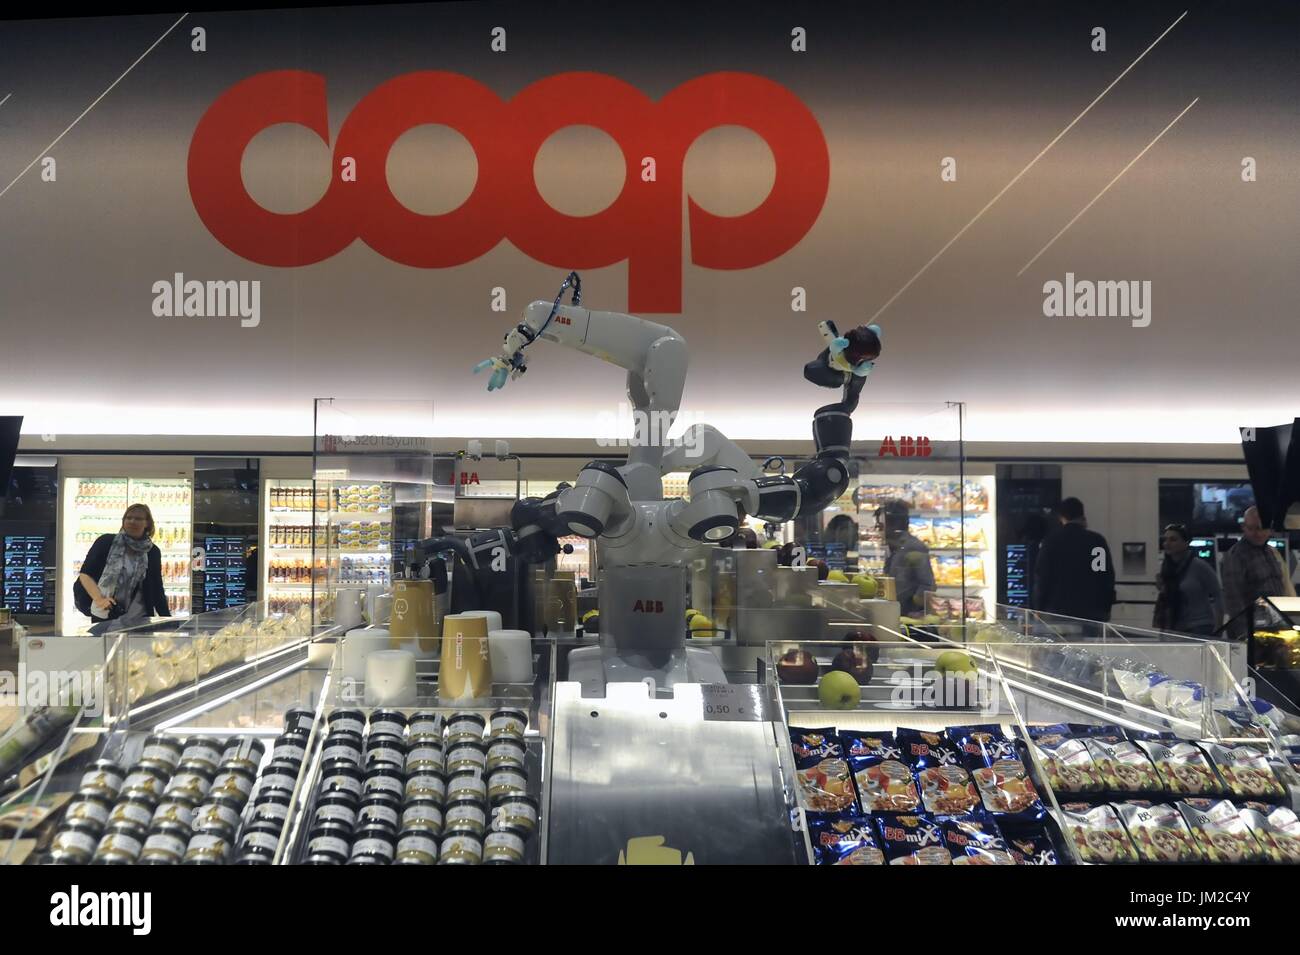 Future Food District, the supermarket of the future, made by Coop, the League of Italian Cooperatives. Presented for the first time at Milan's World Expo 2015, and then reopened in 2016 in the Bicocca district. Customers can experiment and try new ways to shop: large touch-screen high-tech monitors show additional product information, including the origin, nutritional values, the possible presence of allergenic ingredients, instructions for disposal and related products. Fundamental Issues related to food, shopping and sustainability Stock Photo